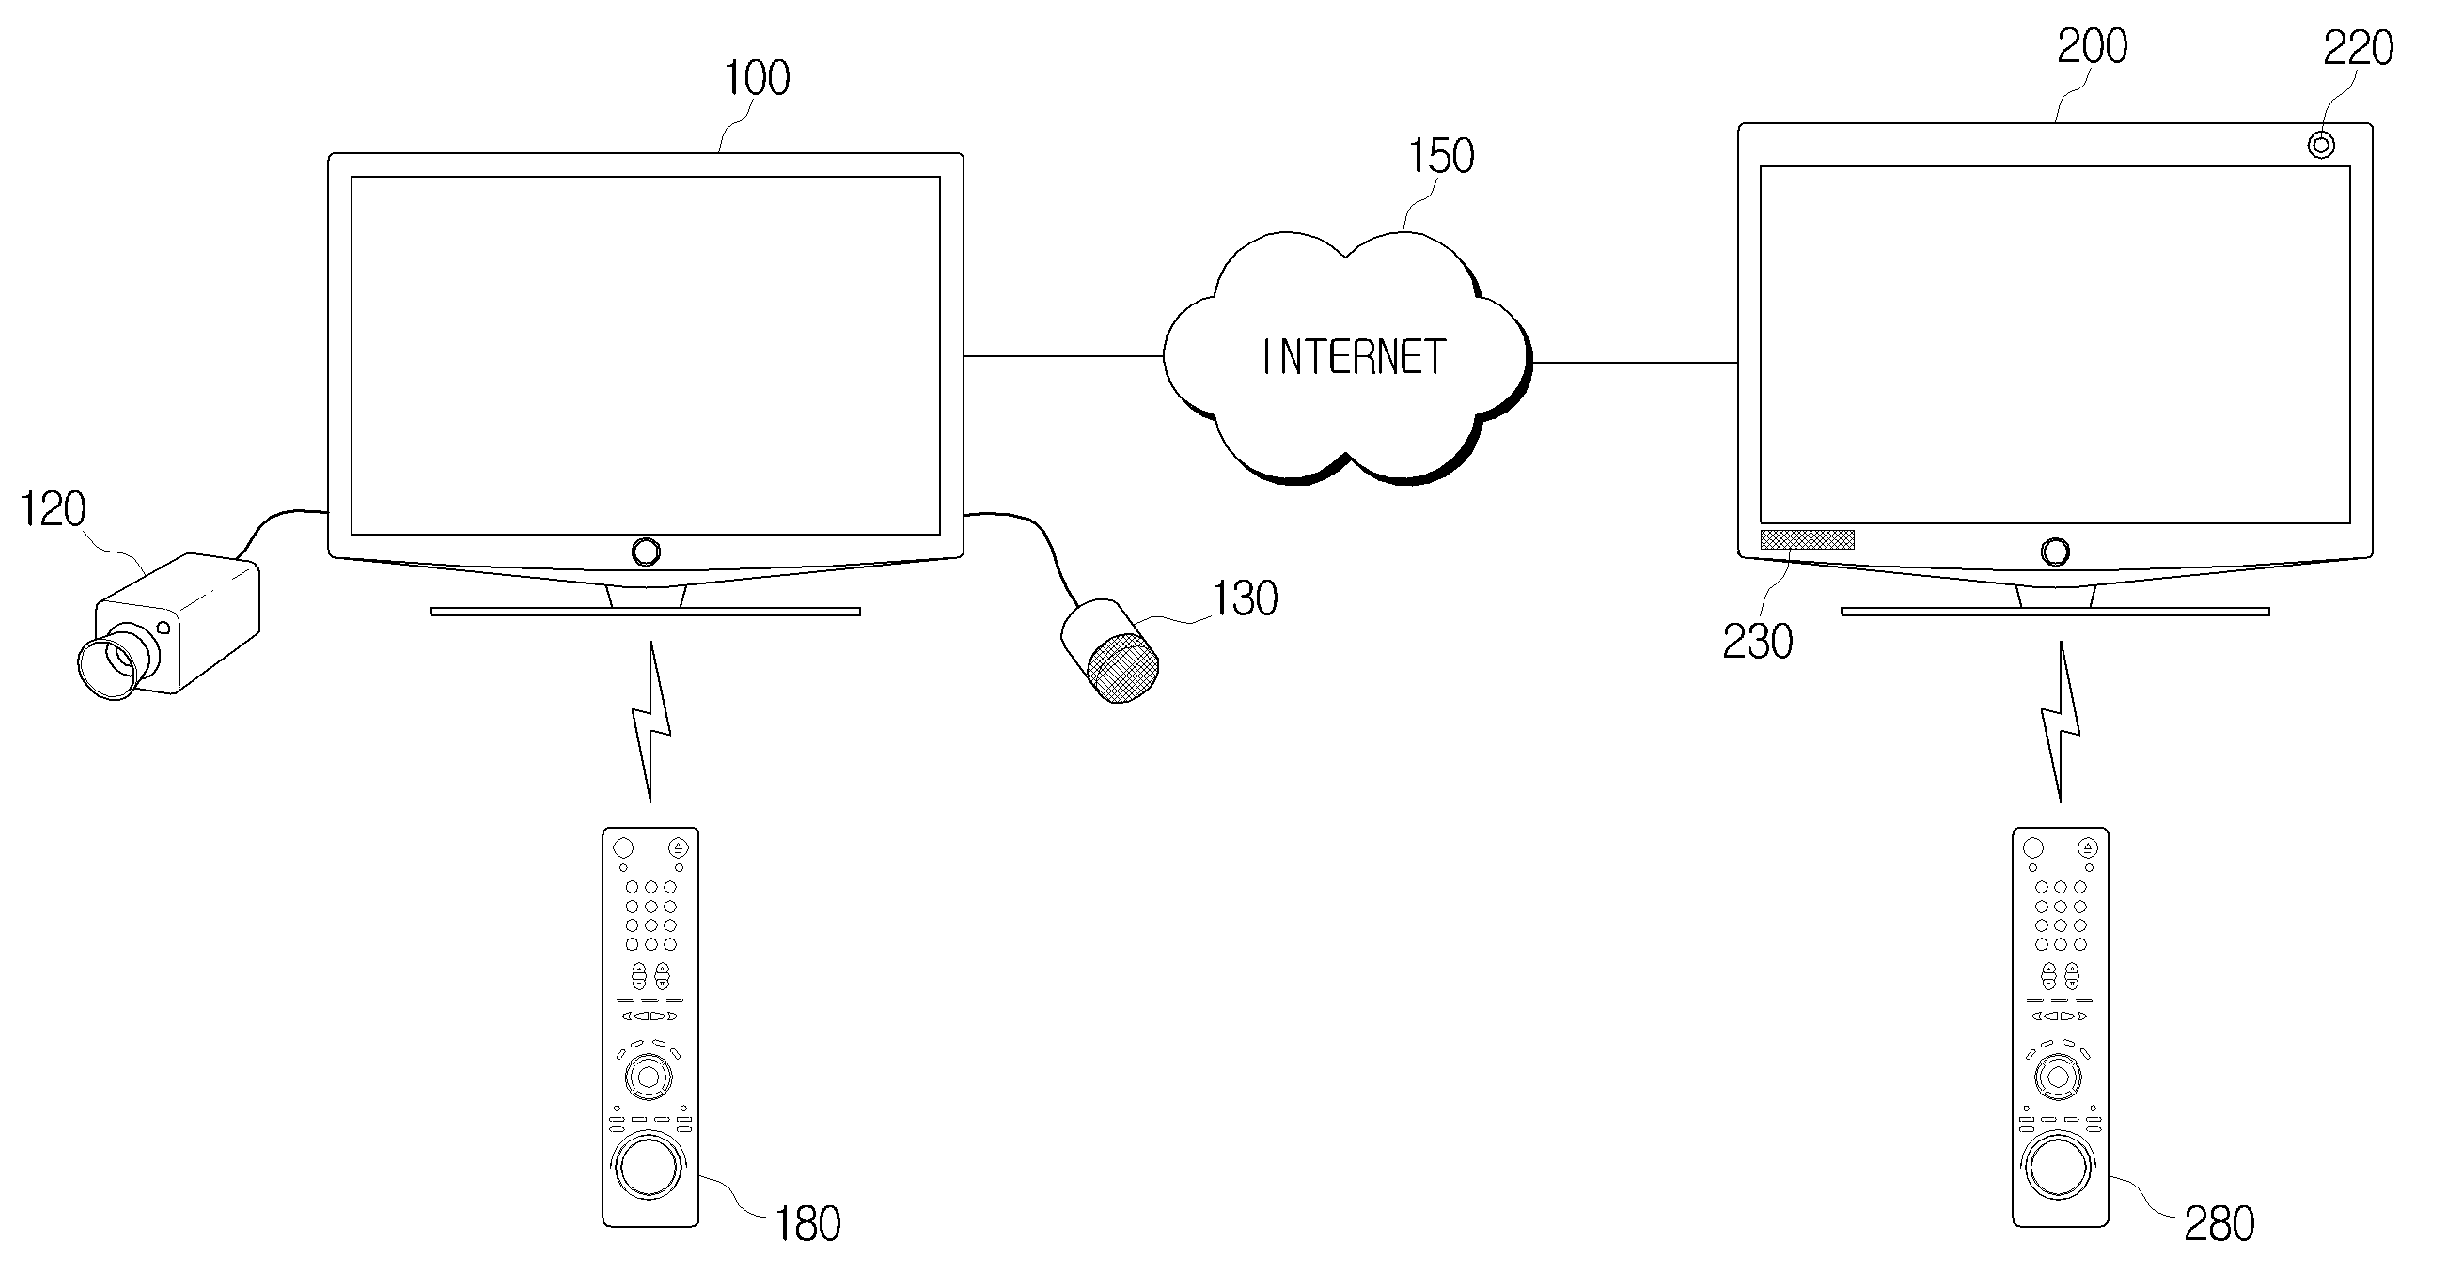 Method for providing video telephony using broadcast receiving apparatus